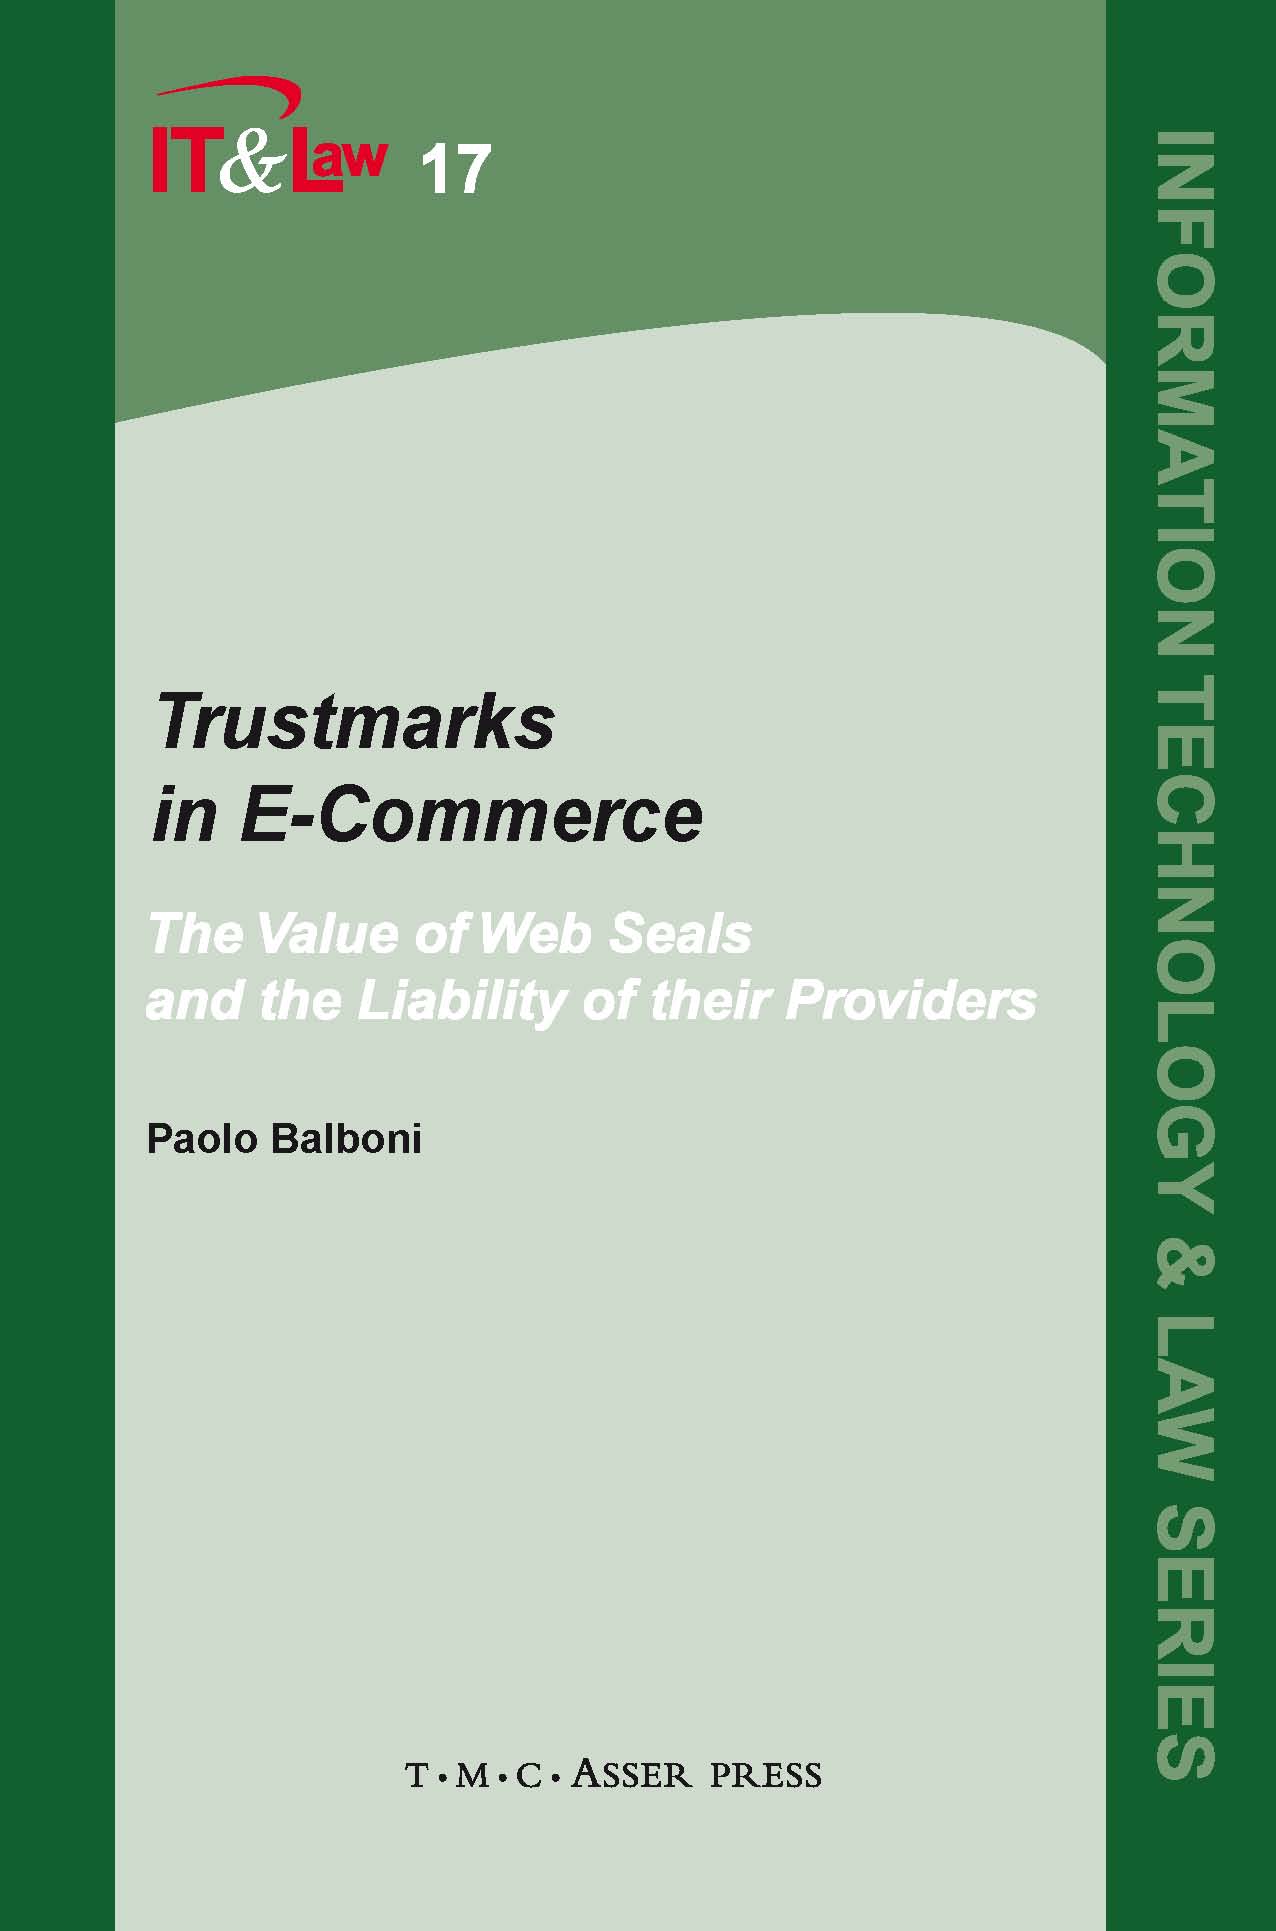 Trustmarks in E-Commerce - The Value of Web Seals and the Liability of their Providers